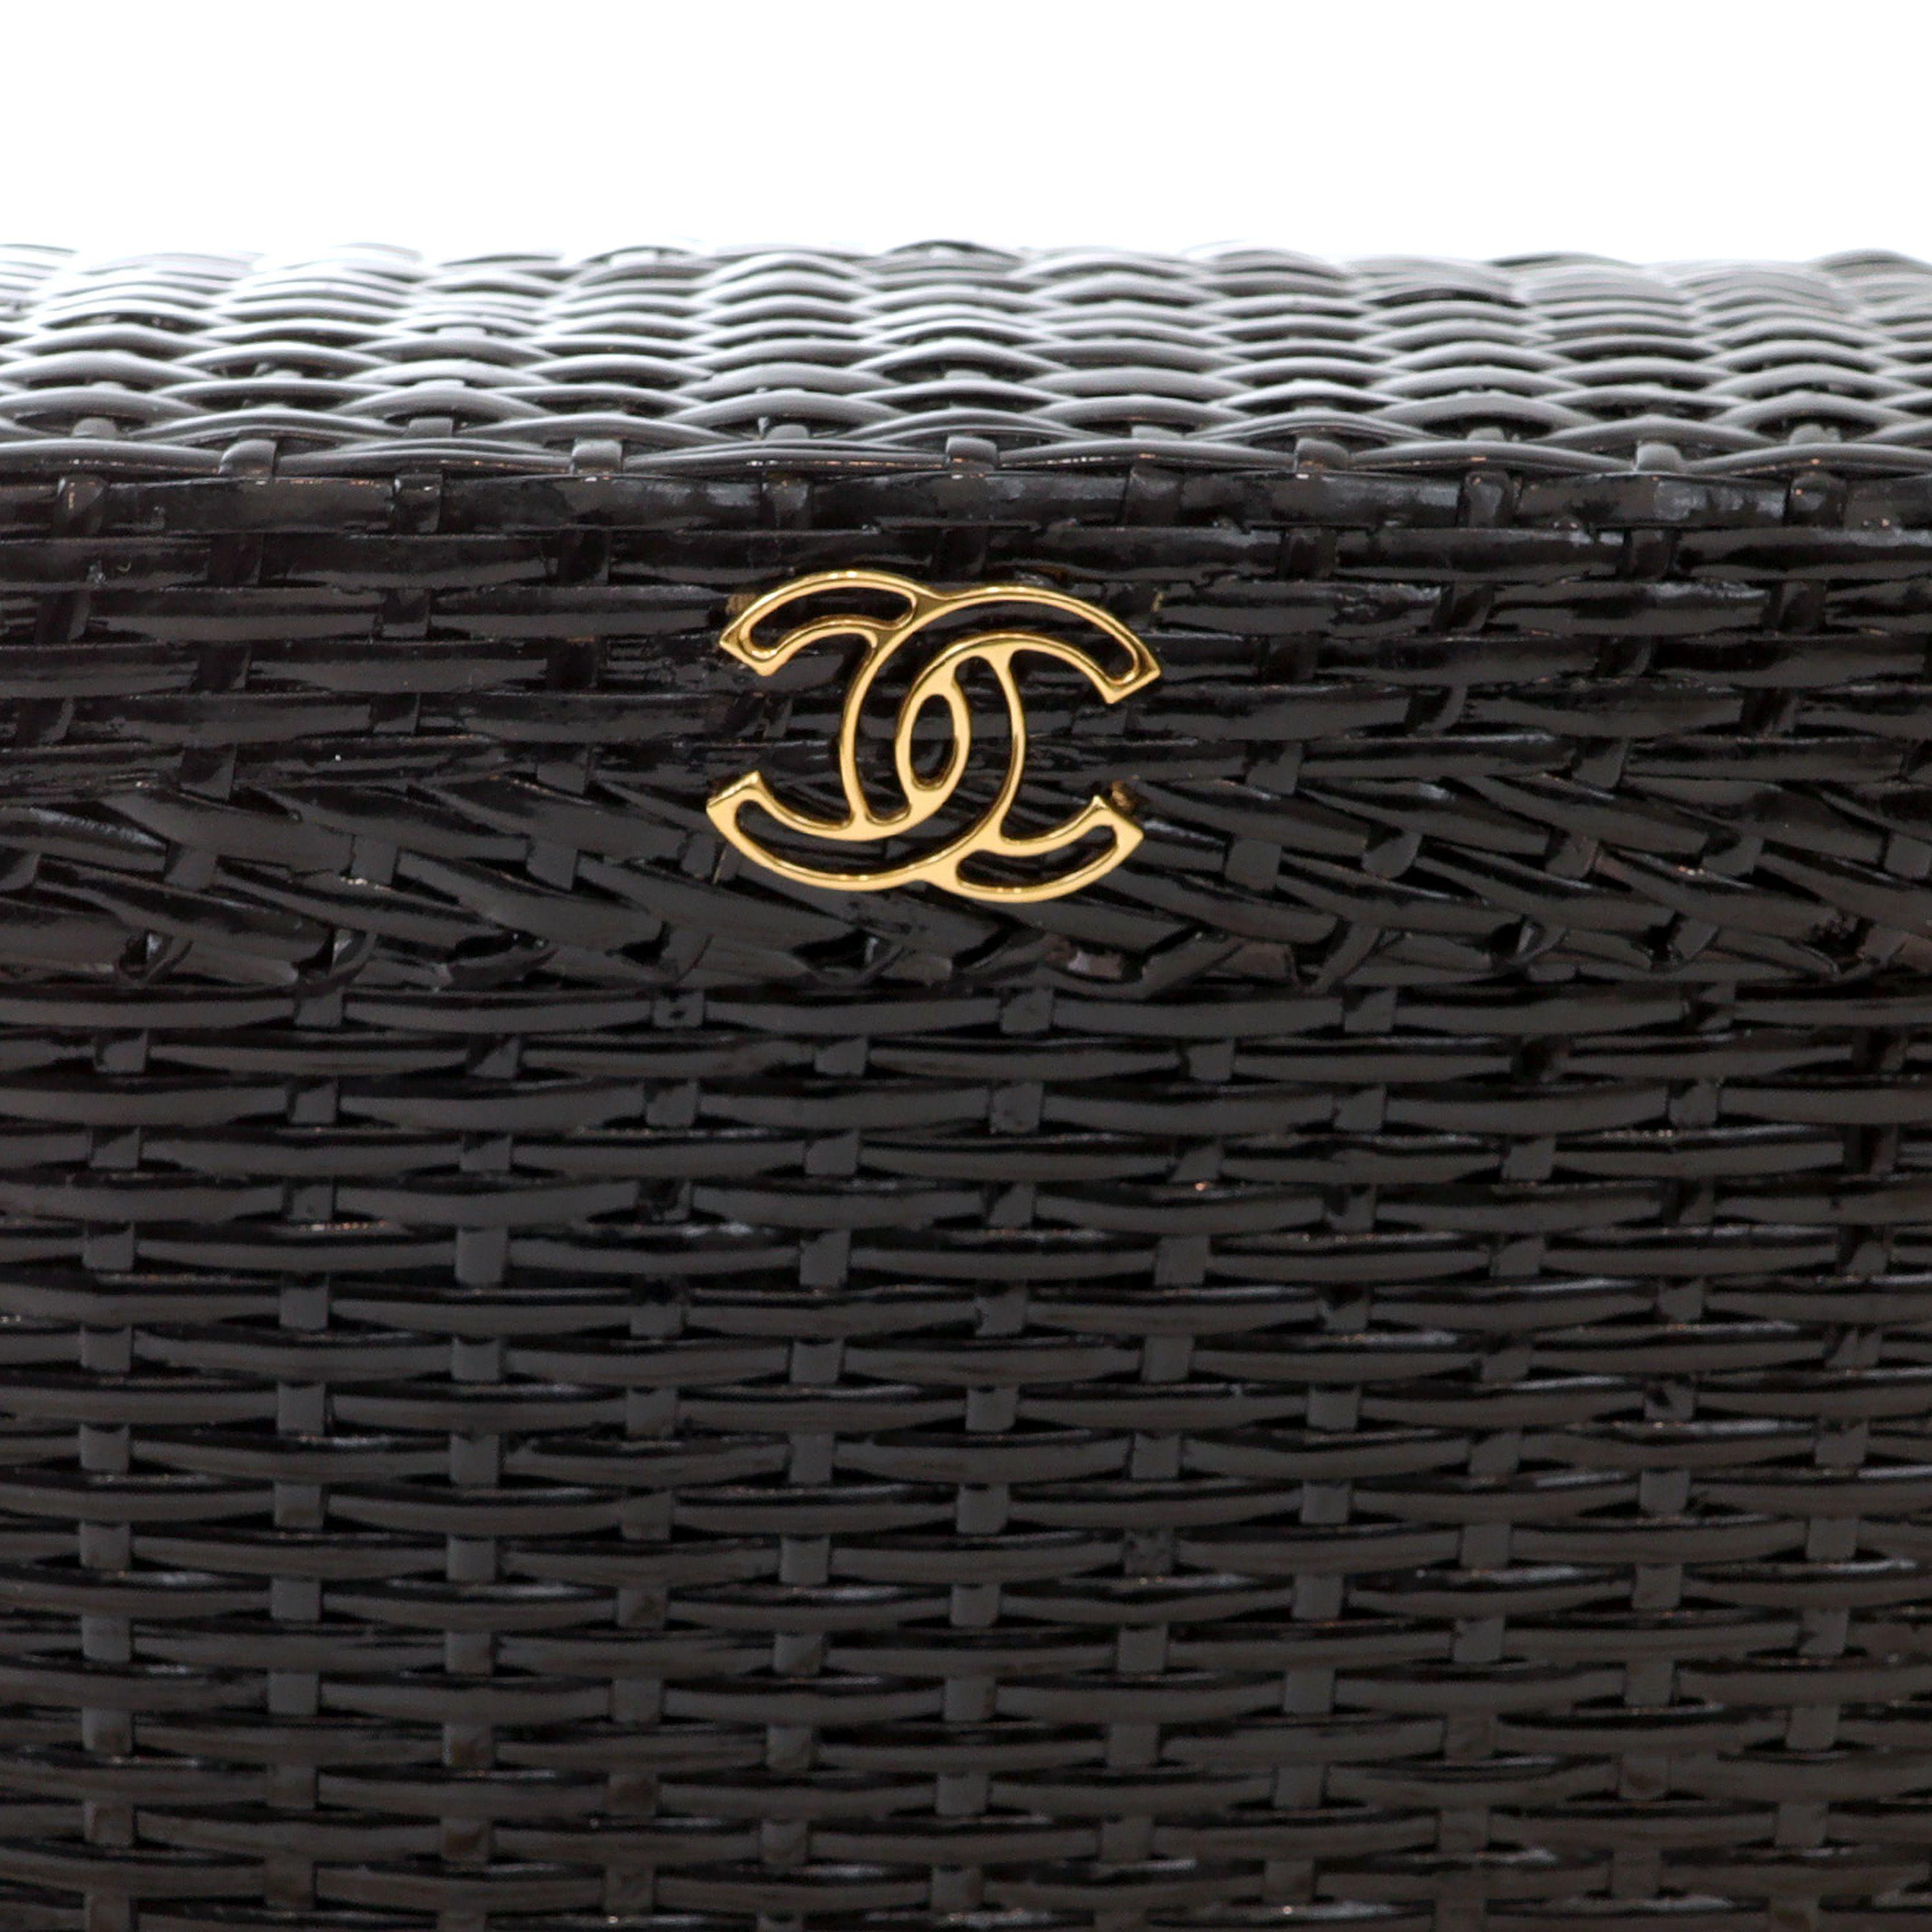 This authentic Chanel Black Wicker Picnic Basket Bag is in excellent vintage condition.  Shiny black wicker with gold tone interlocking CC emblem.  Long gold chain strap may be carried on the shoulder or cross the body.    Dust bag included.

PBF